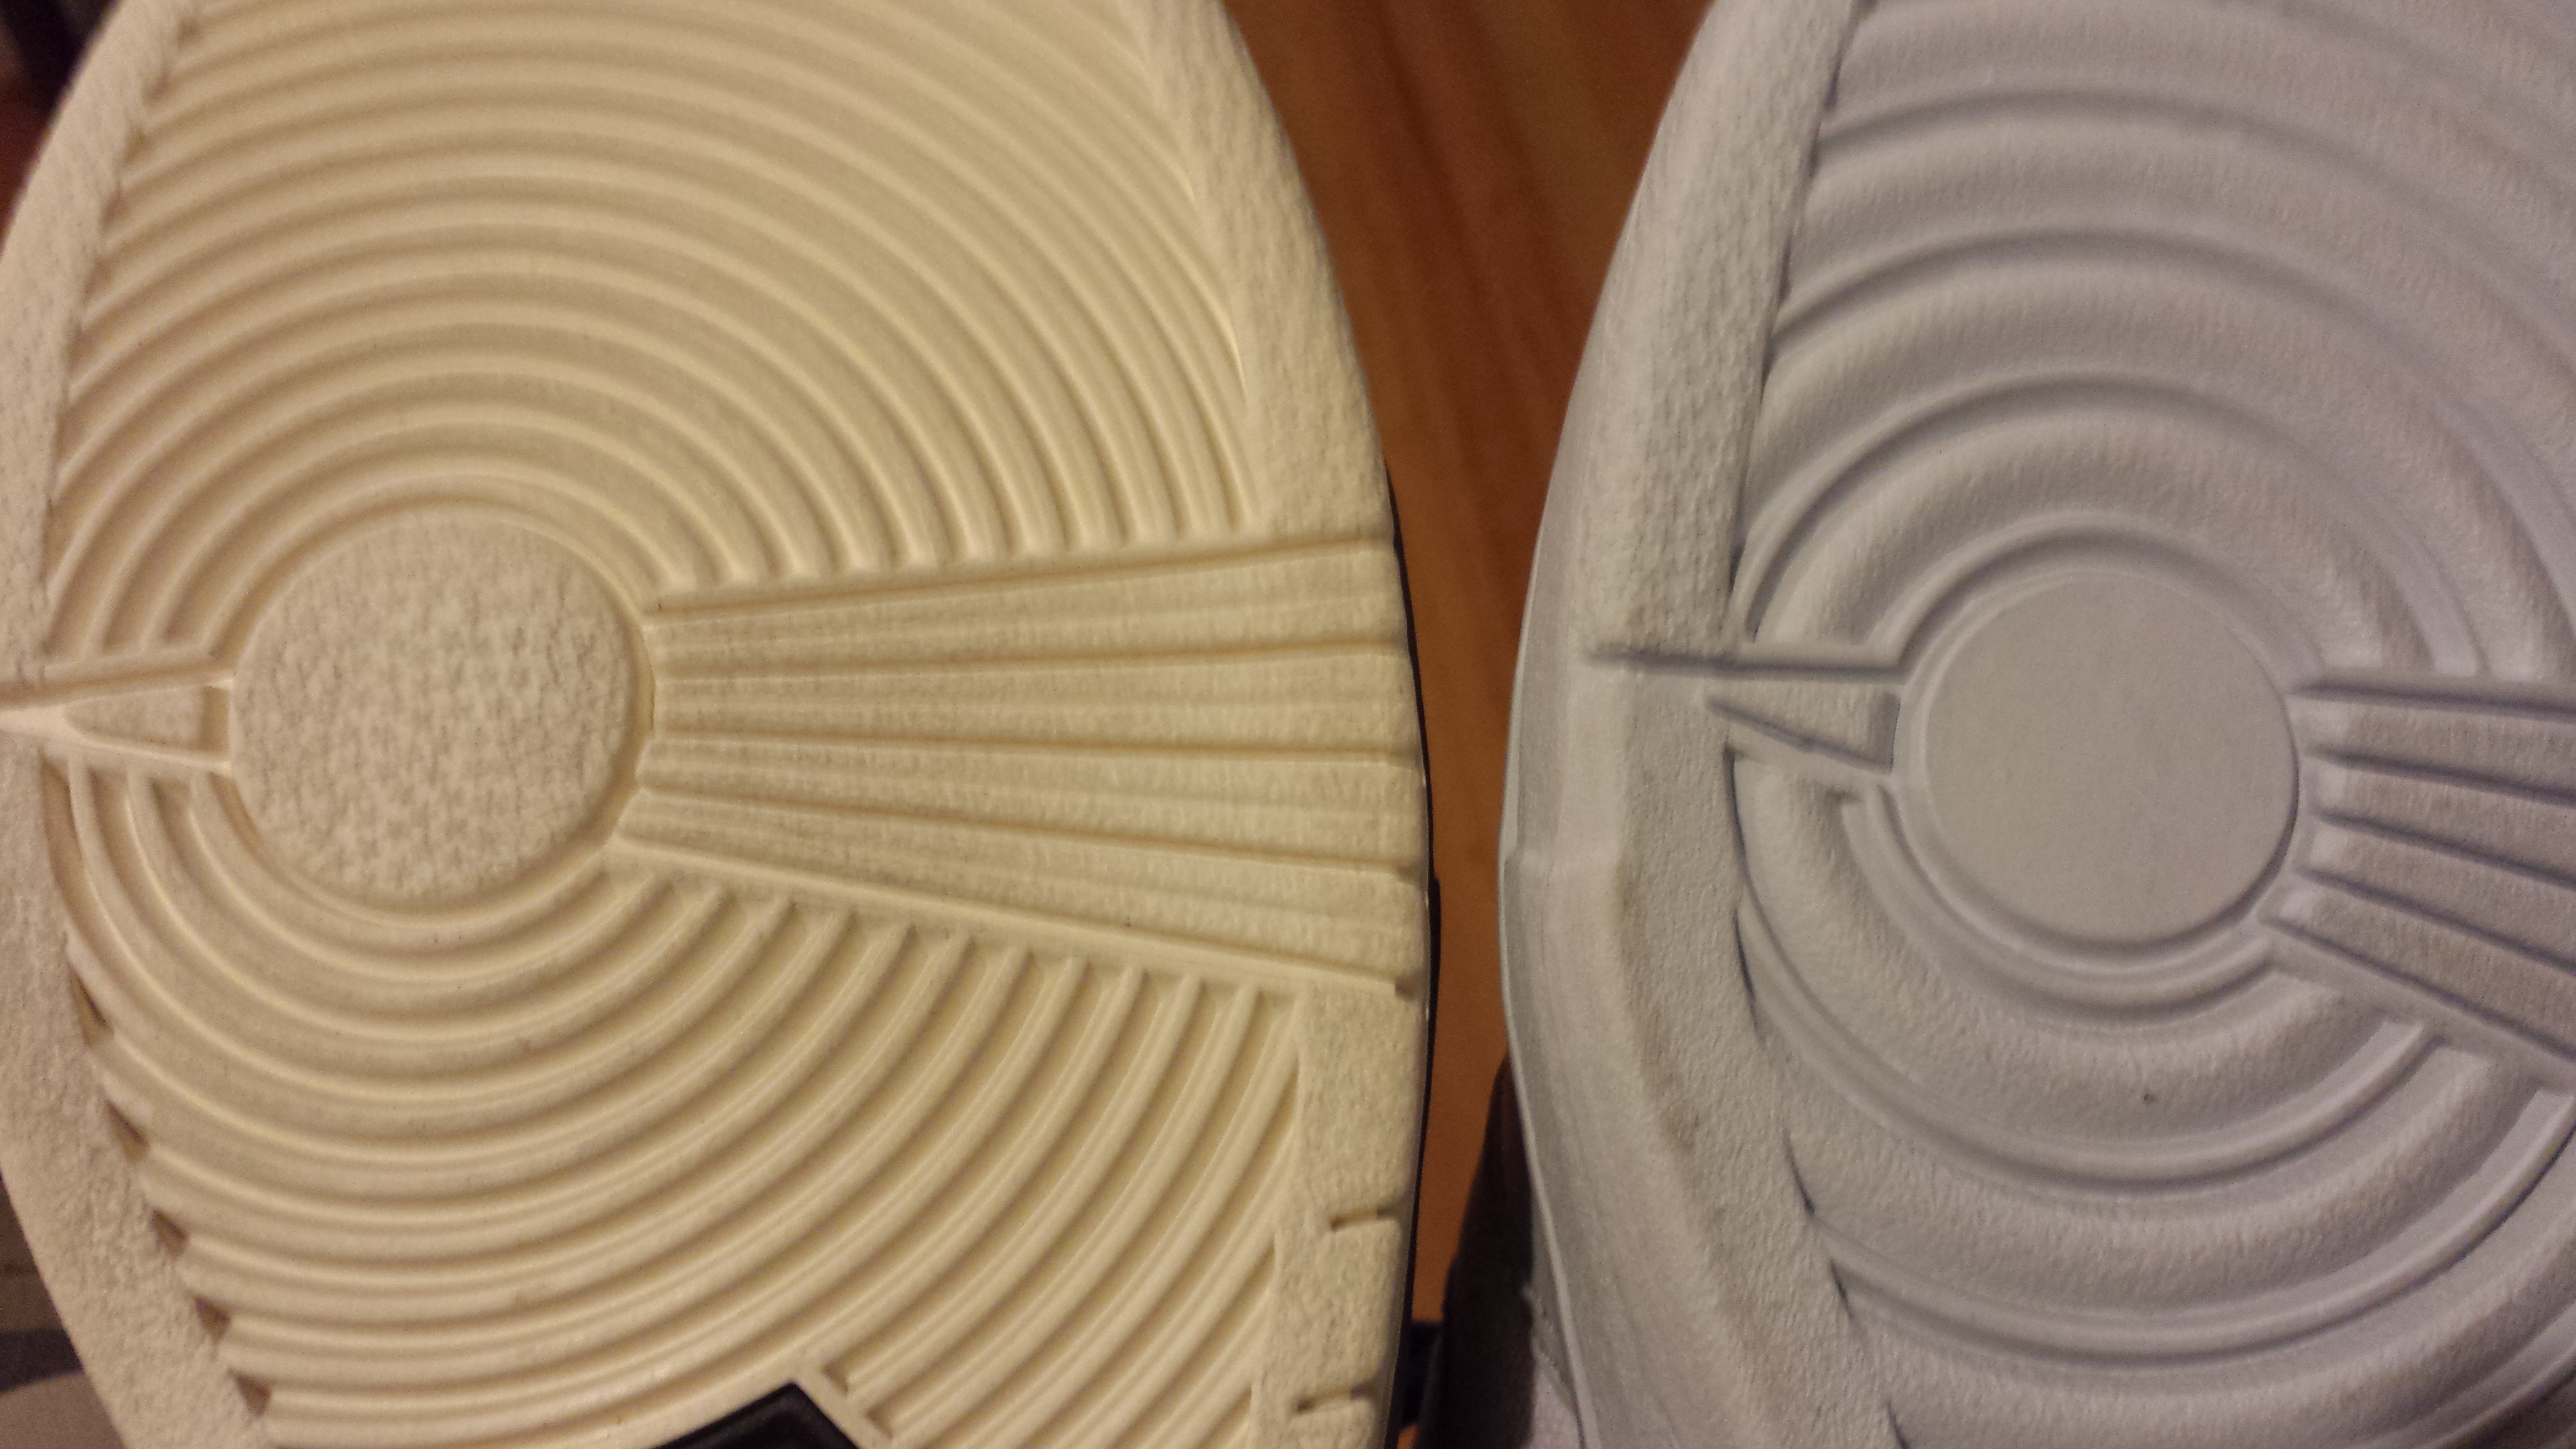 Differences between Nike Dunk SB and 